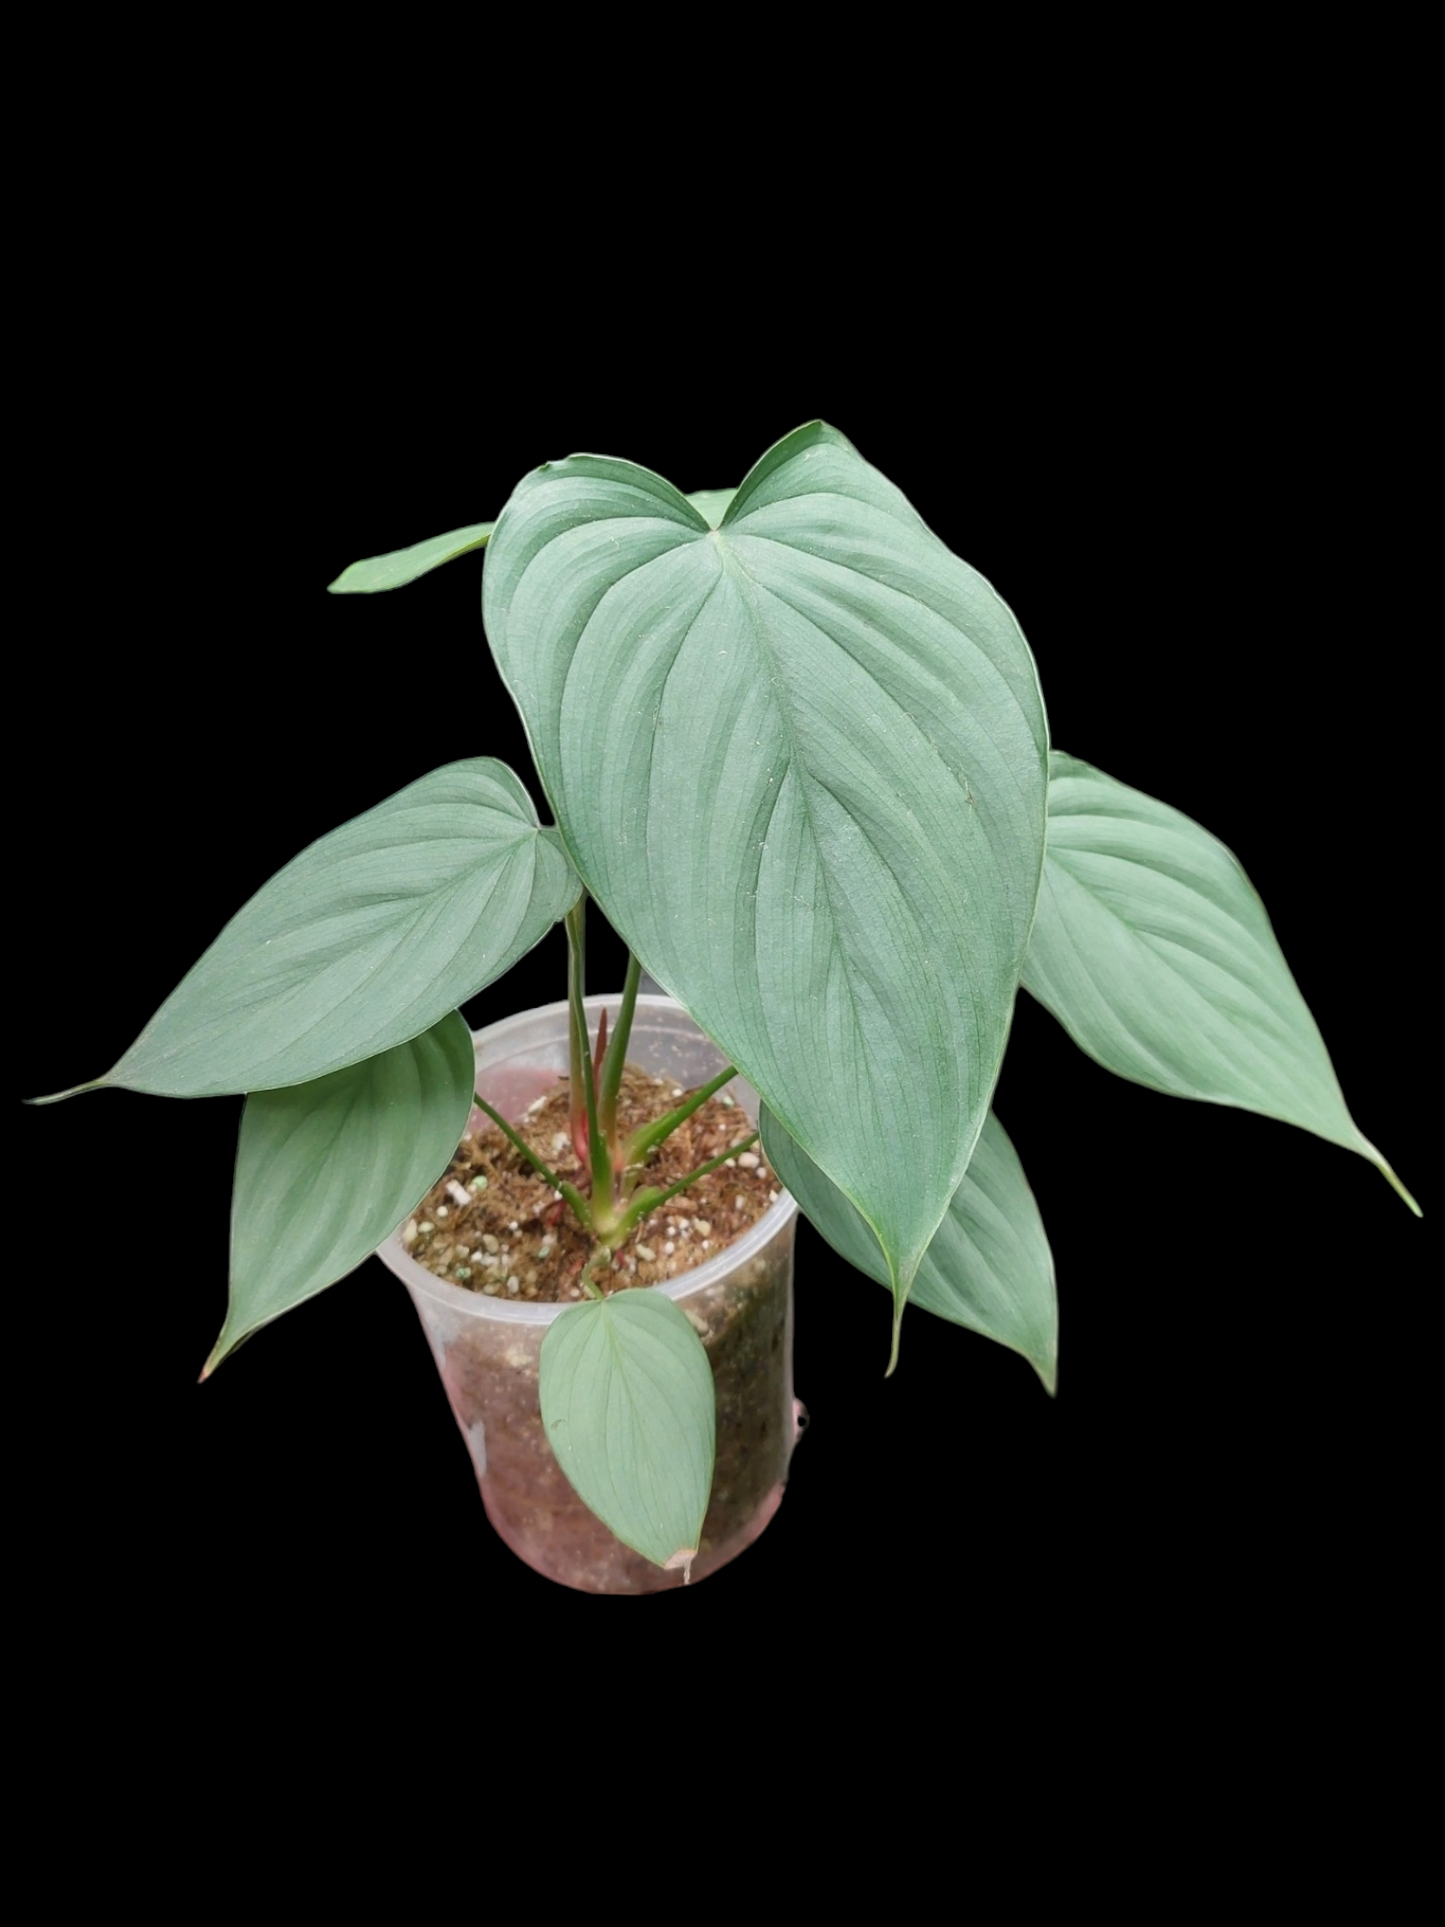 Philodendron sp. 'Silver Angel' with 7 Leaves  (EXACT PLANT)